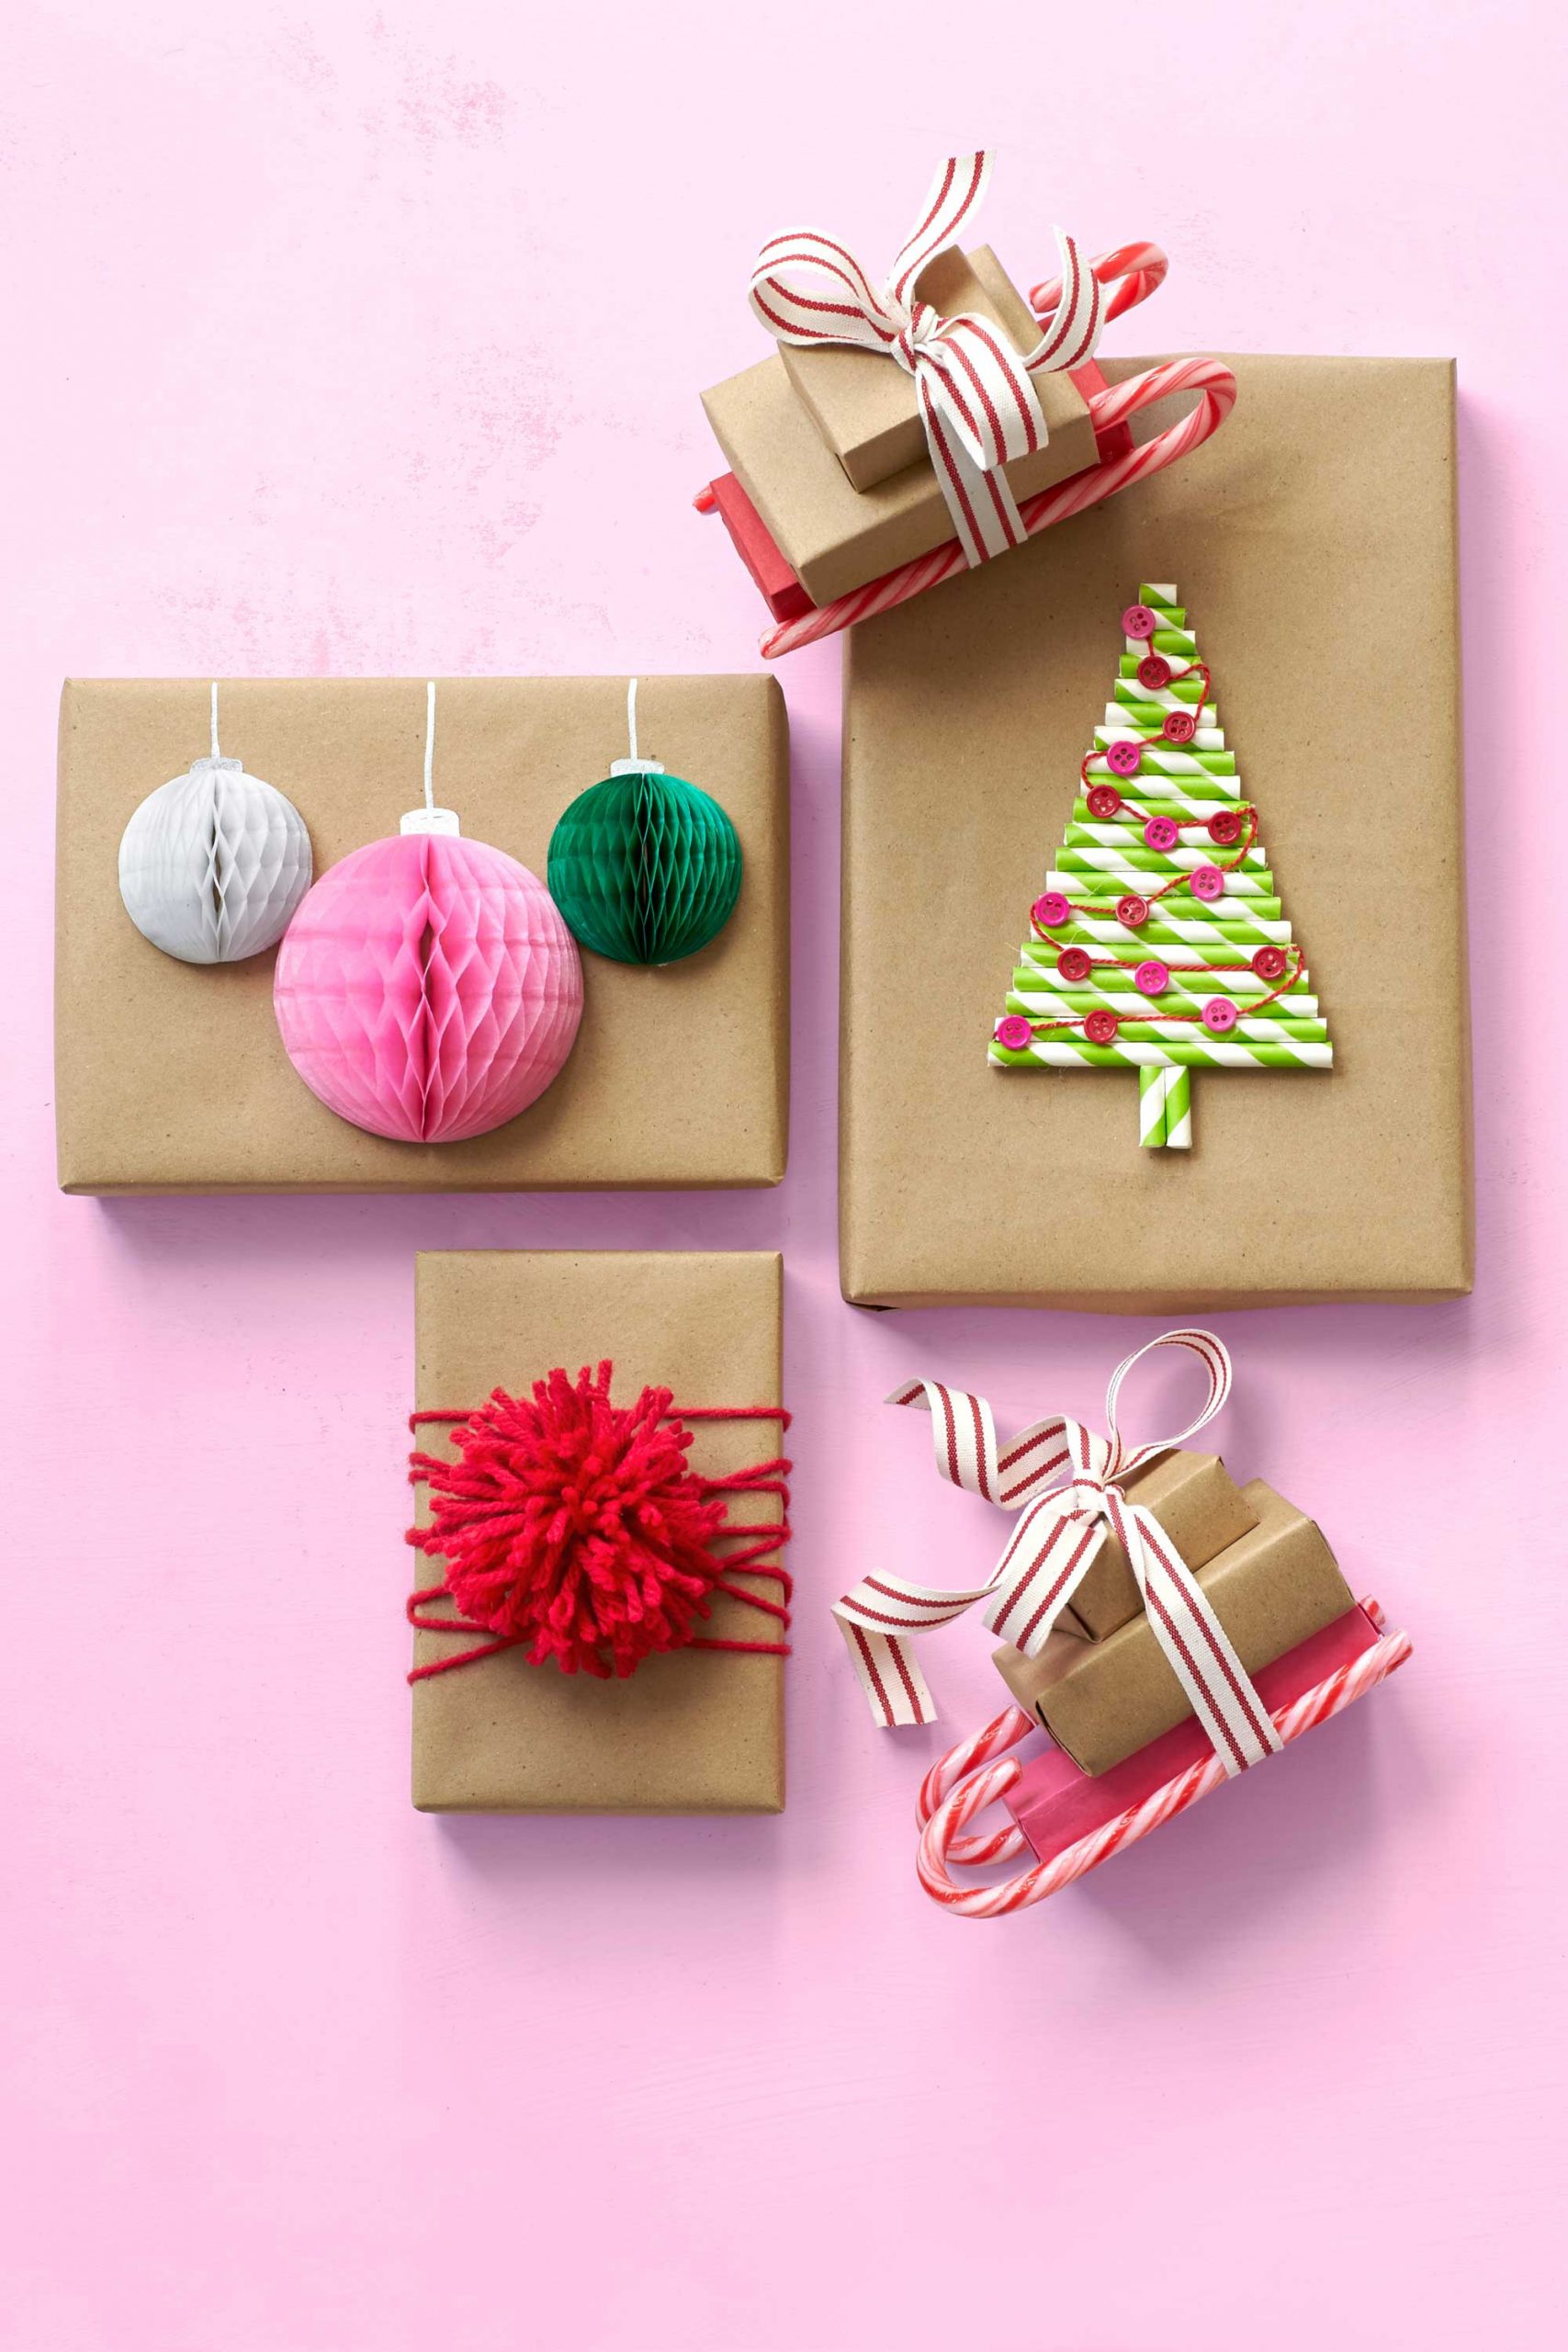 Creative Gift Wrapping Ideas For Christmas
 30 Unique Gift Wrapping Ideas for Christmas How to Wrap